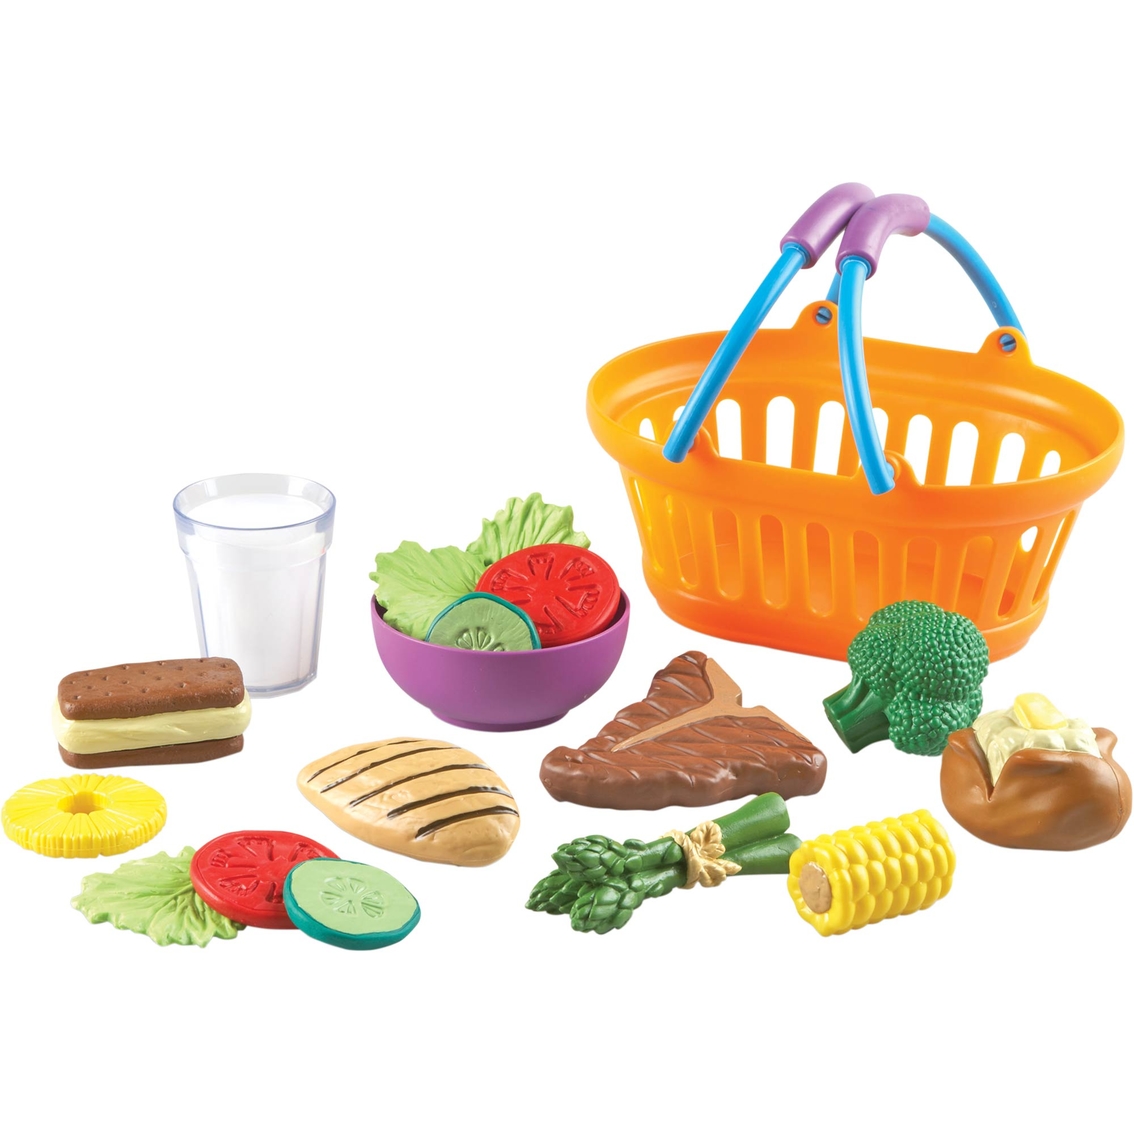 Learning Resources New Sprouts Dinner Basket - Image 2 of 2